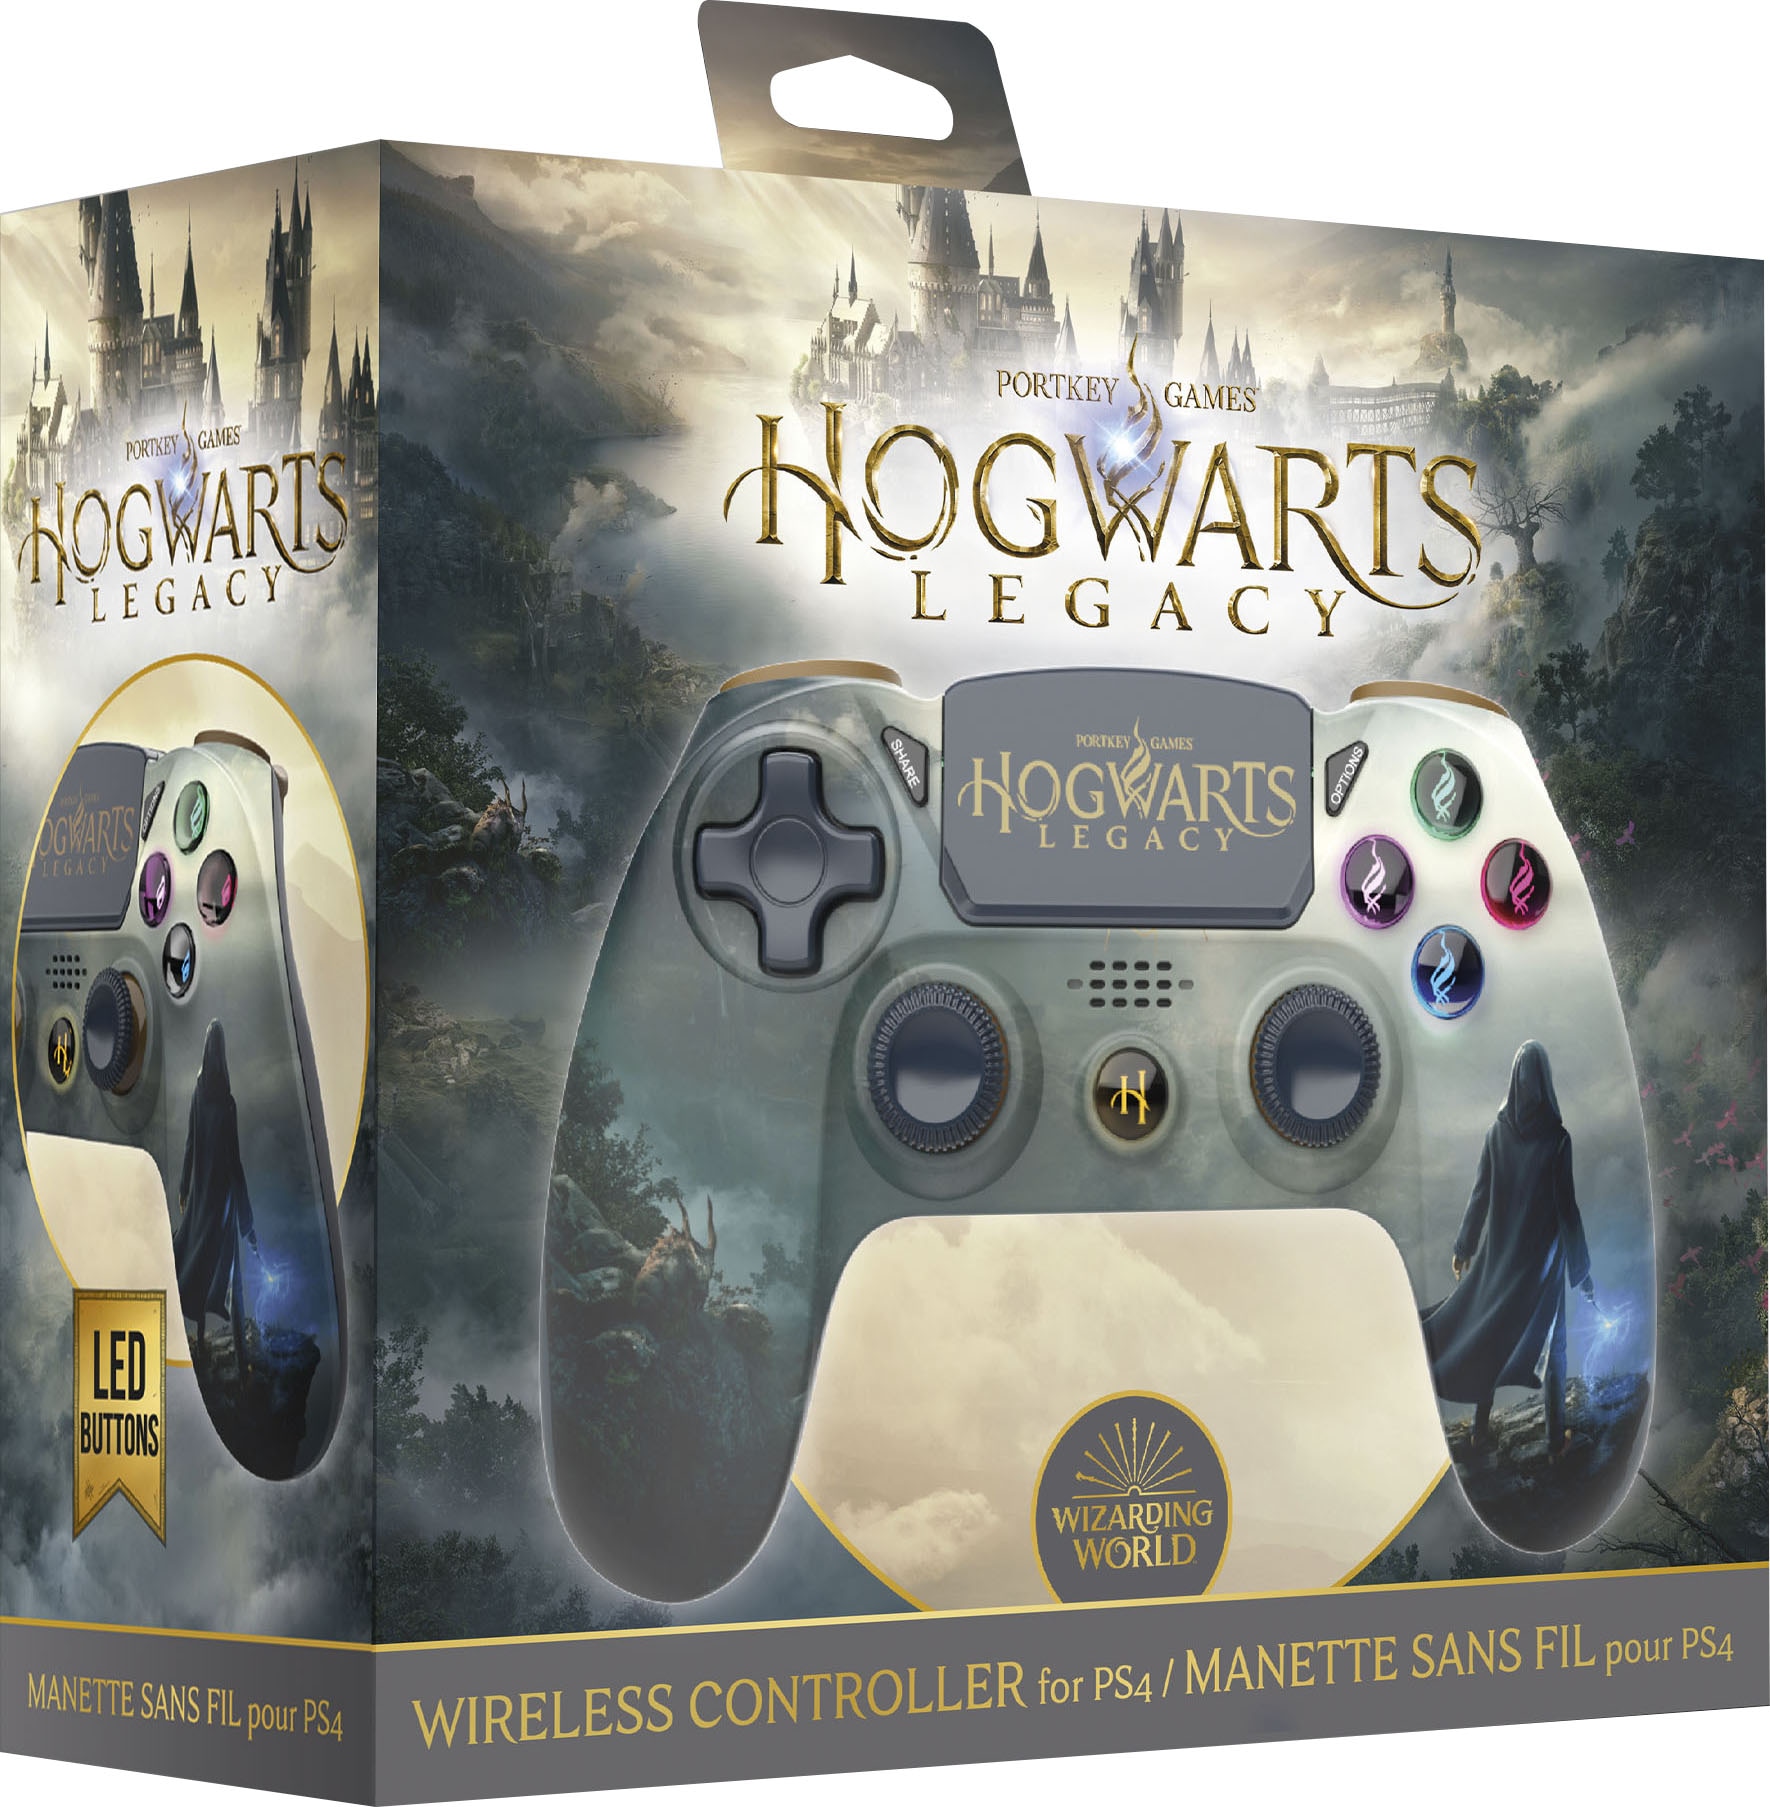 Freaks and Geeks PlayStation 4-Controller »Hogwarts Legacy Wireless Landscape Controller«